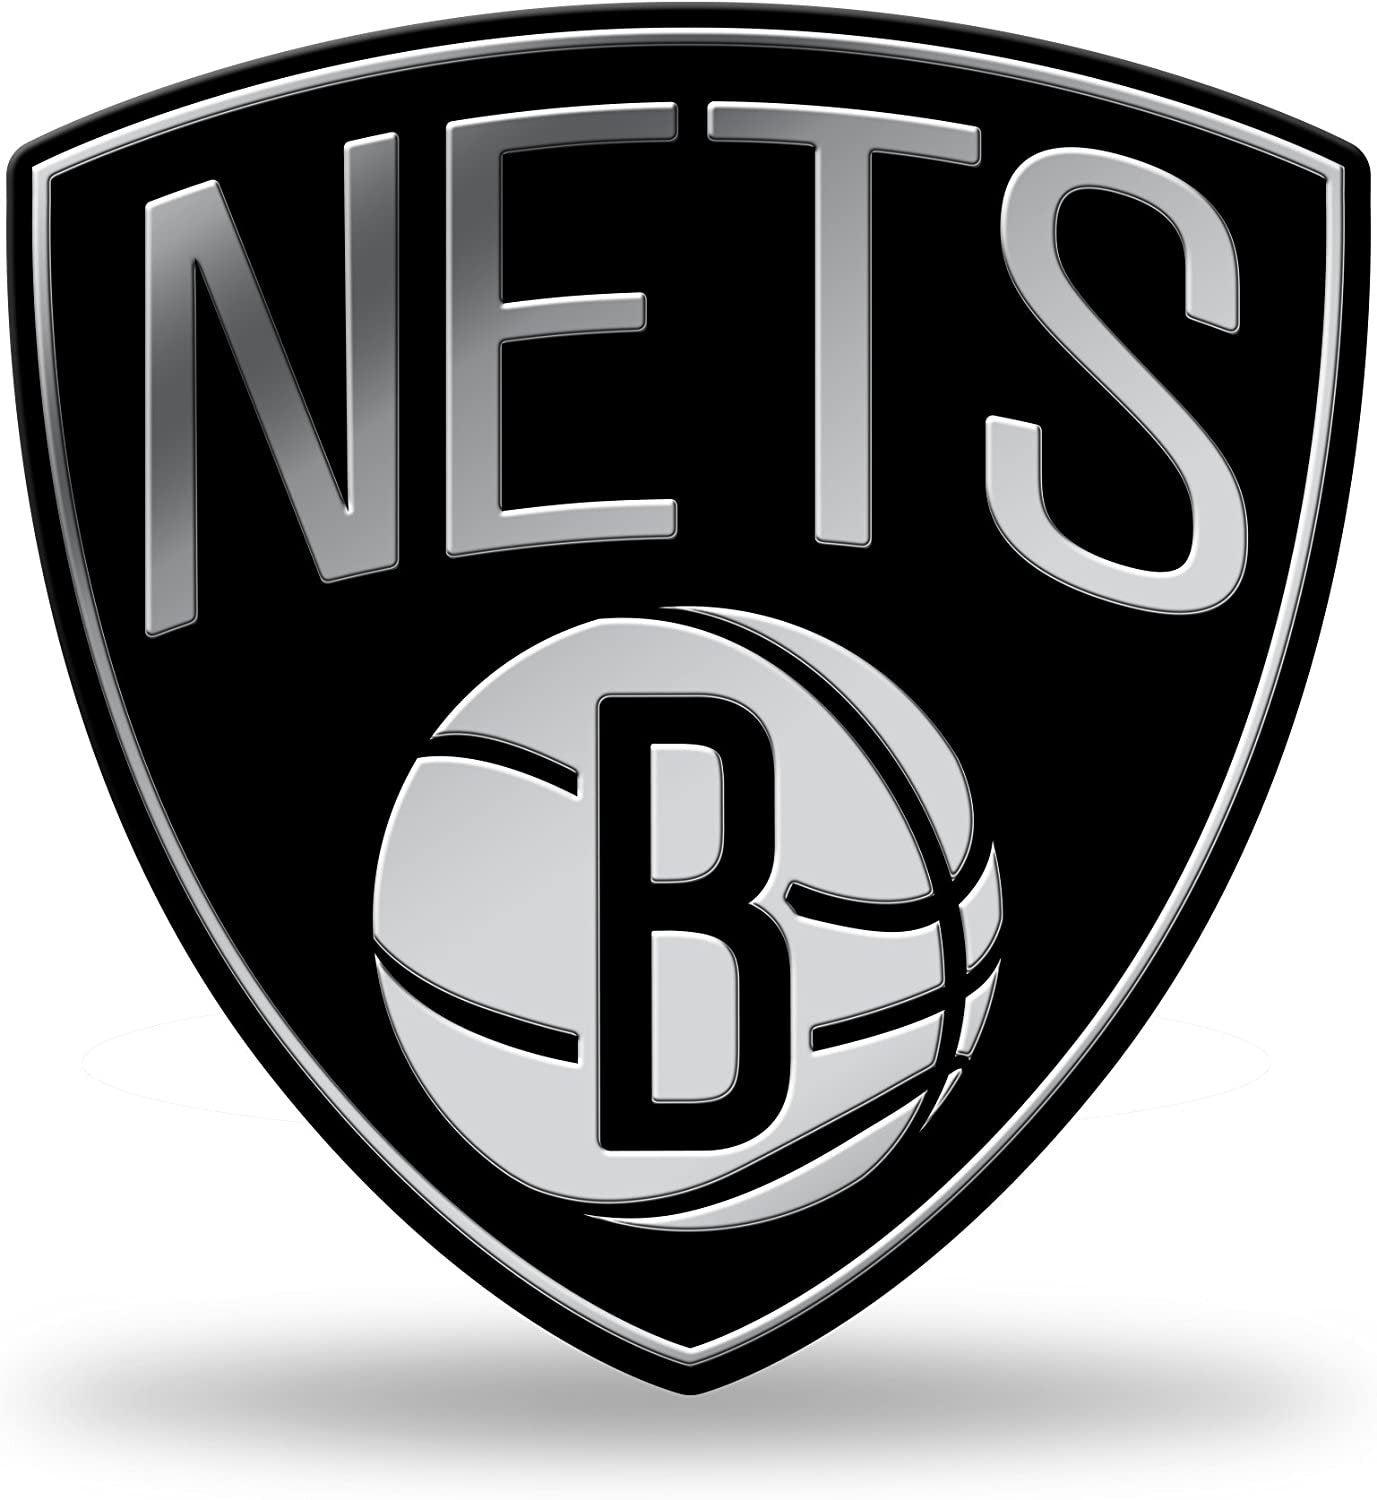 Brooklyn Nets Silver Chrome Color Auto Emblem, Raised Molded Plastic, 3.5 Inch, Adhesive Tape Backing